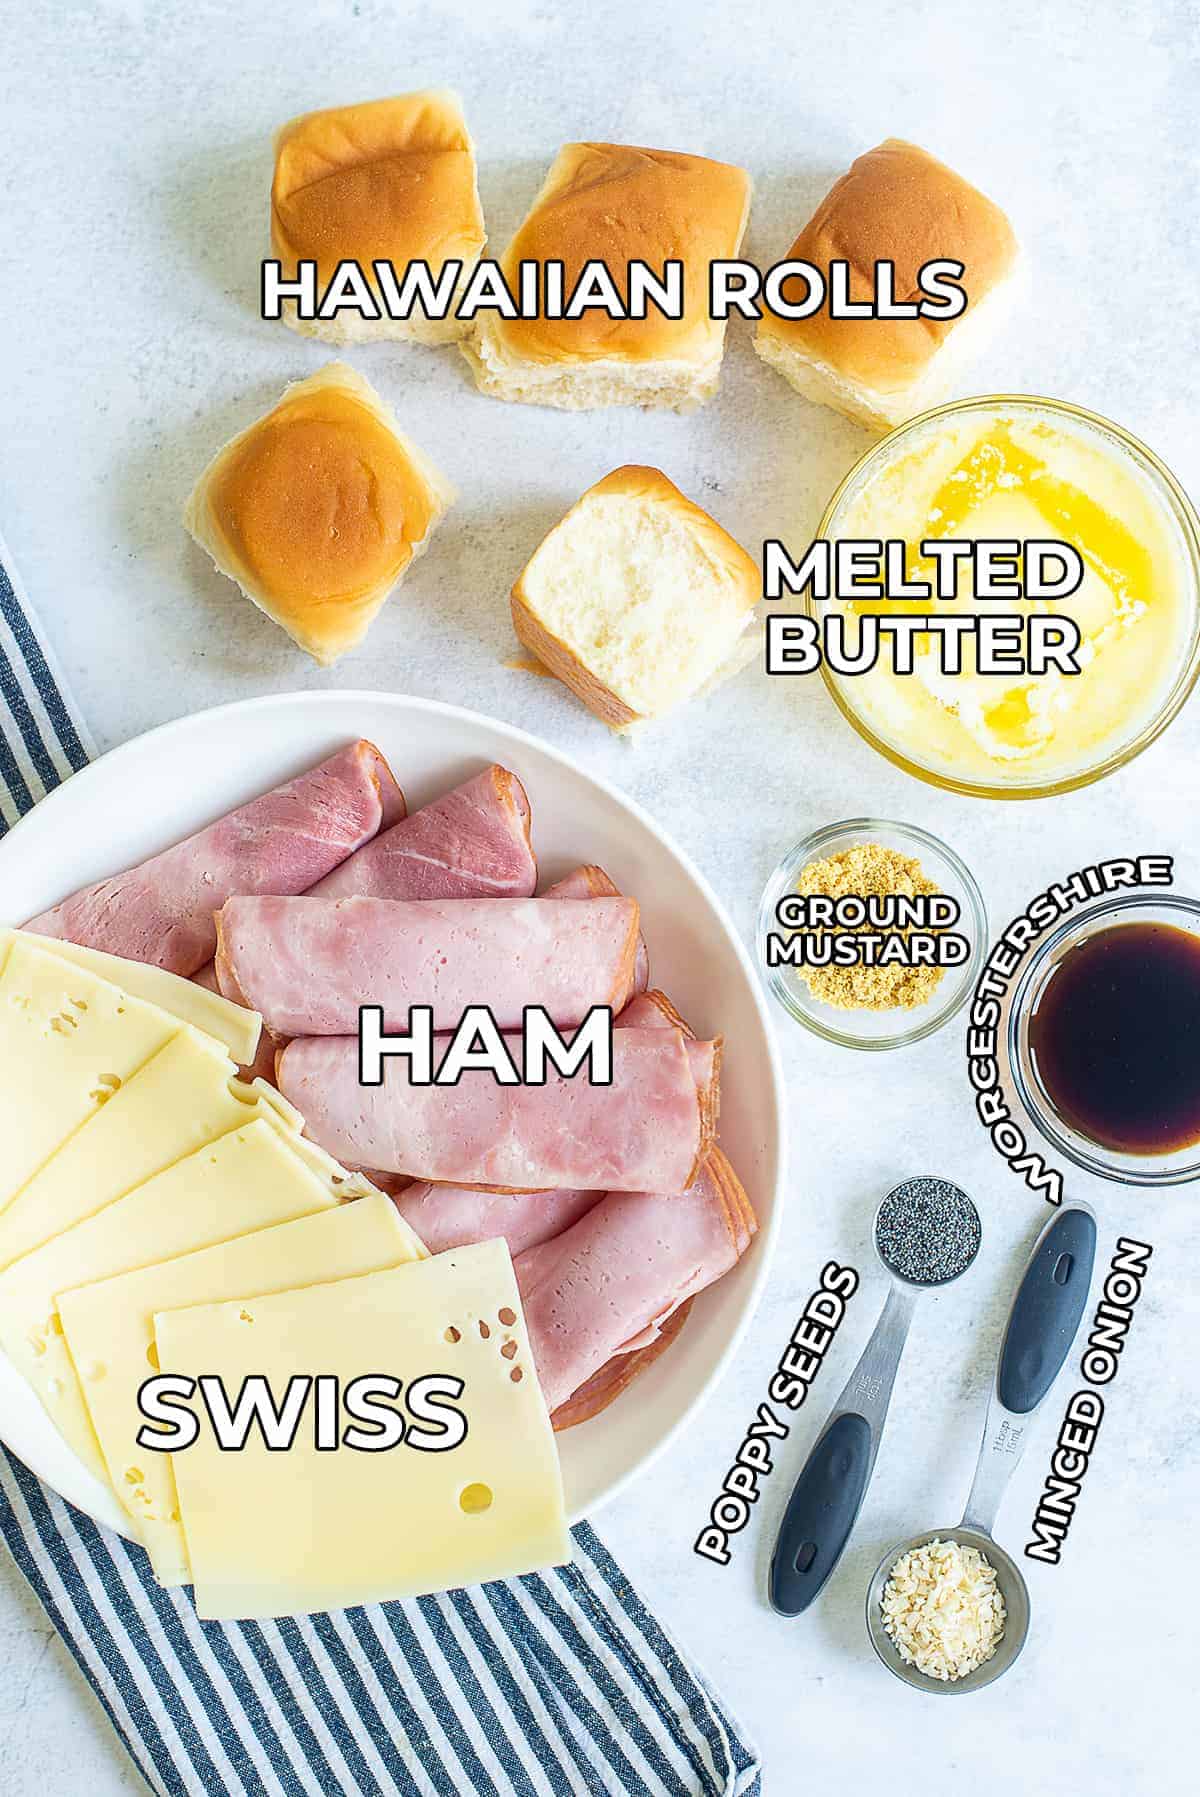 A top down view of all the ingredients used in the recipe including Hawaiian rolls, melted butter, ham, swiss, Worcestershire sauce, and seasoning.